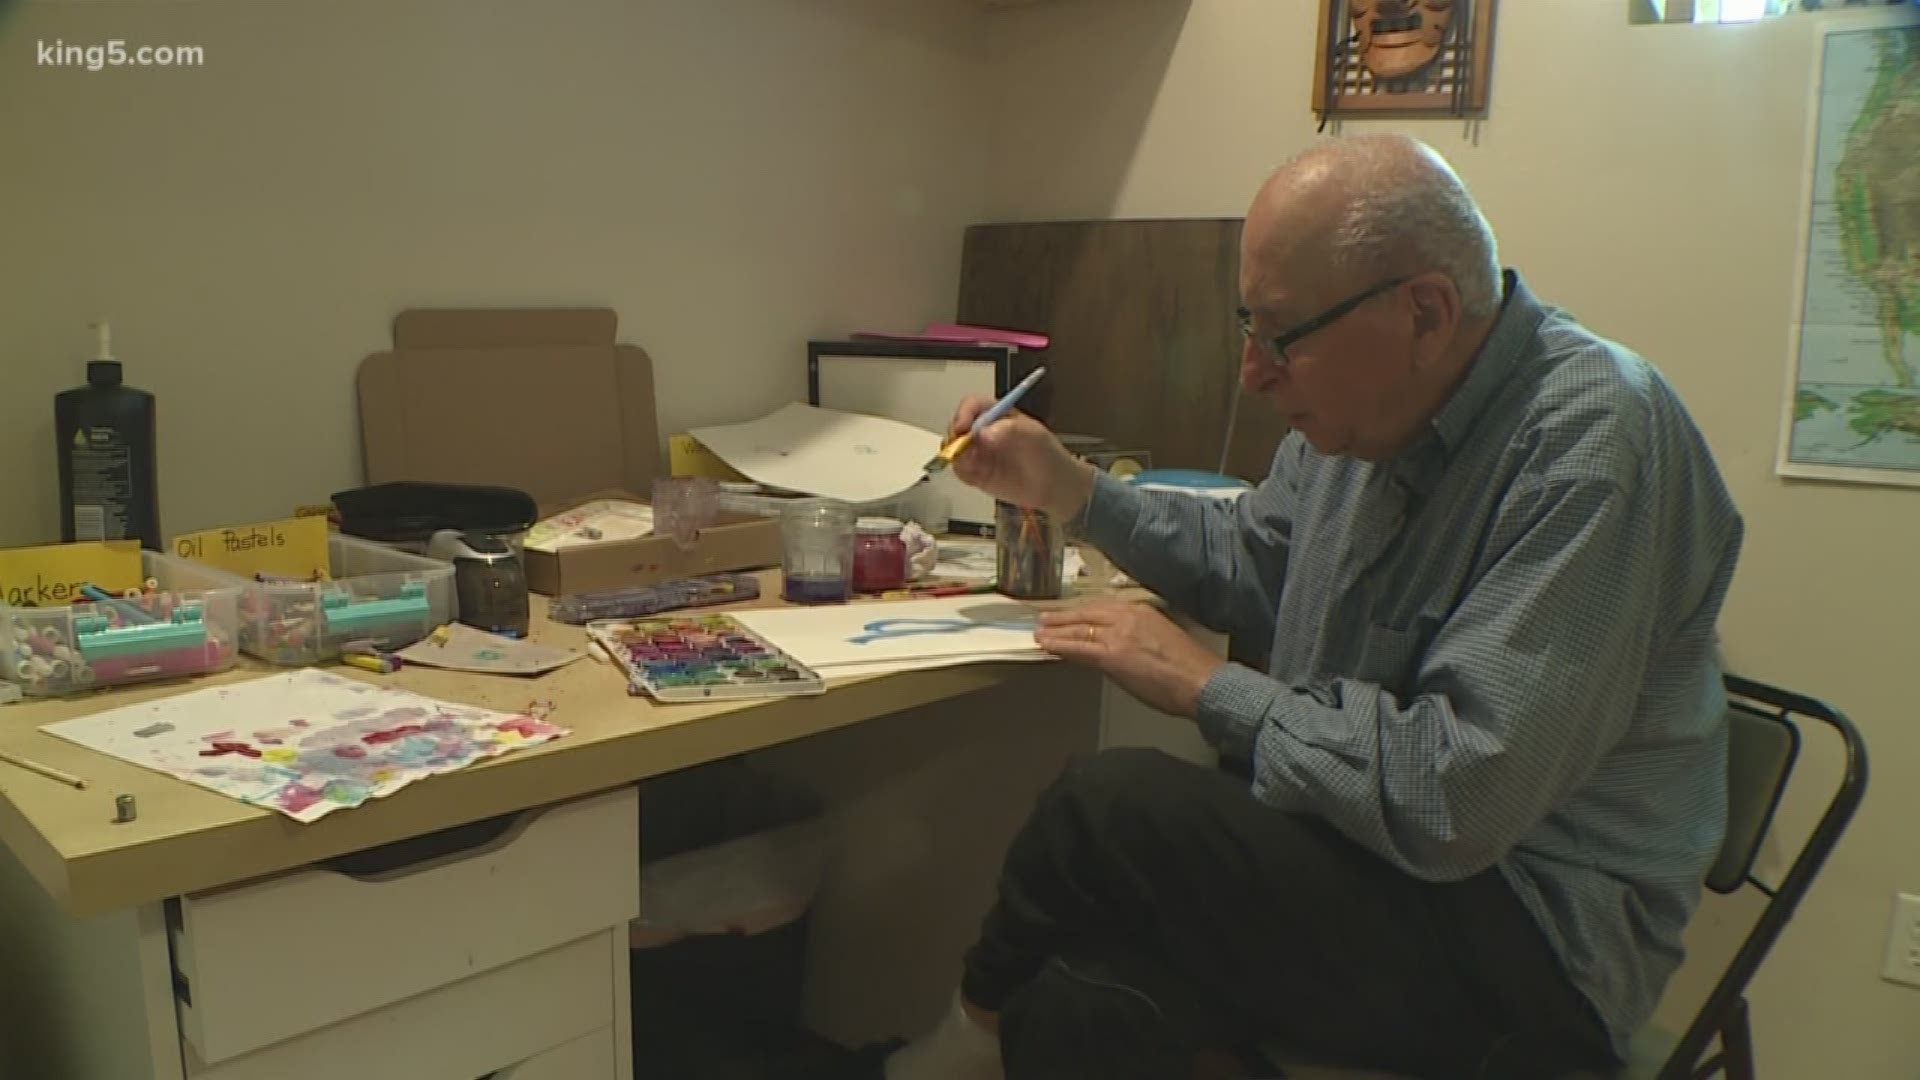 The Art of Alzheimer's exhibit, a travelling exhibit that showcases art created by Alzheimer's patients, is stopping in Bellevue.